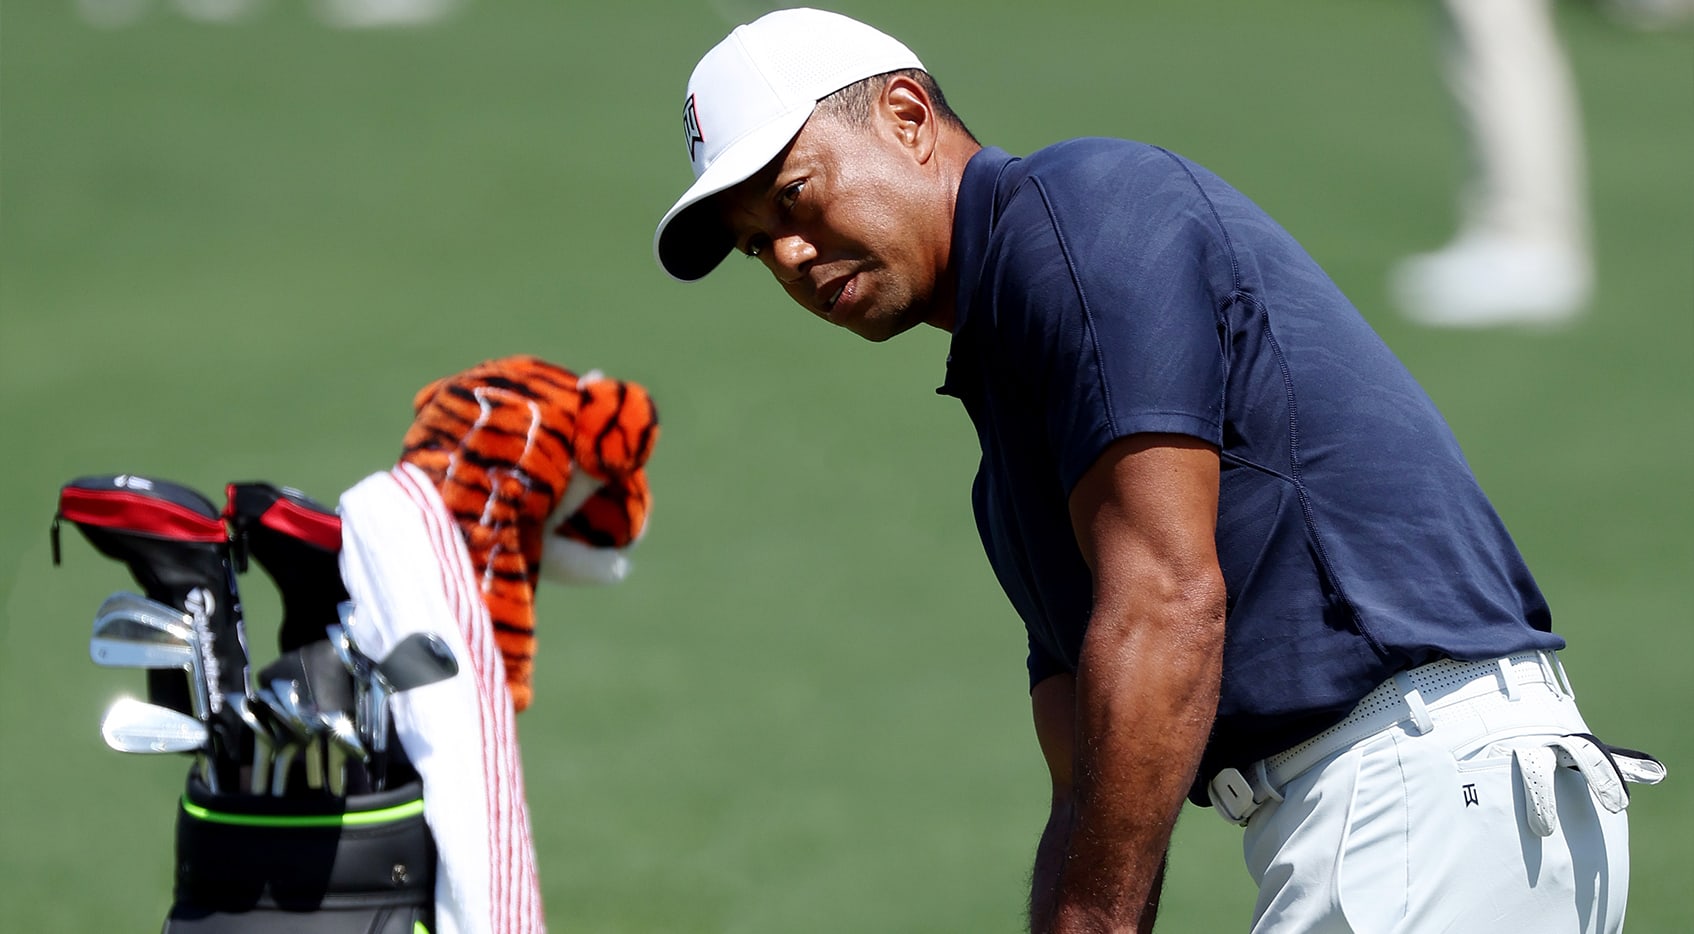 A look at Tiger Woods' equipment for the Masters PGA TOUR